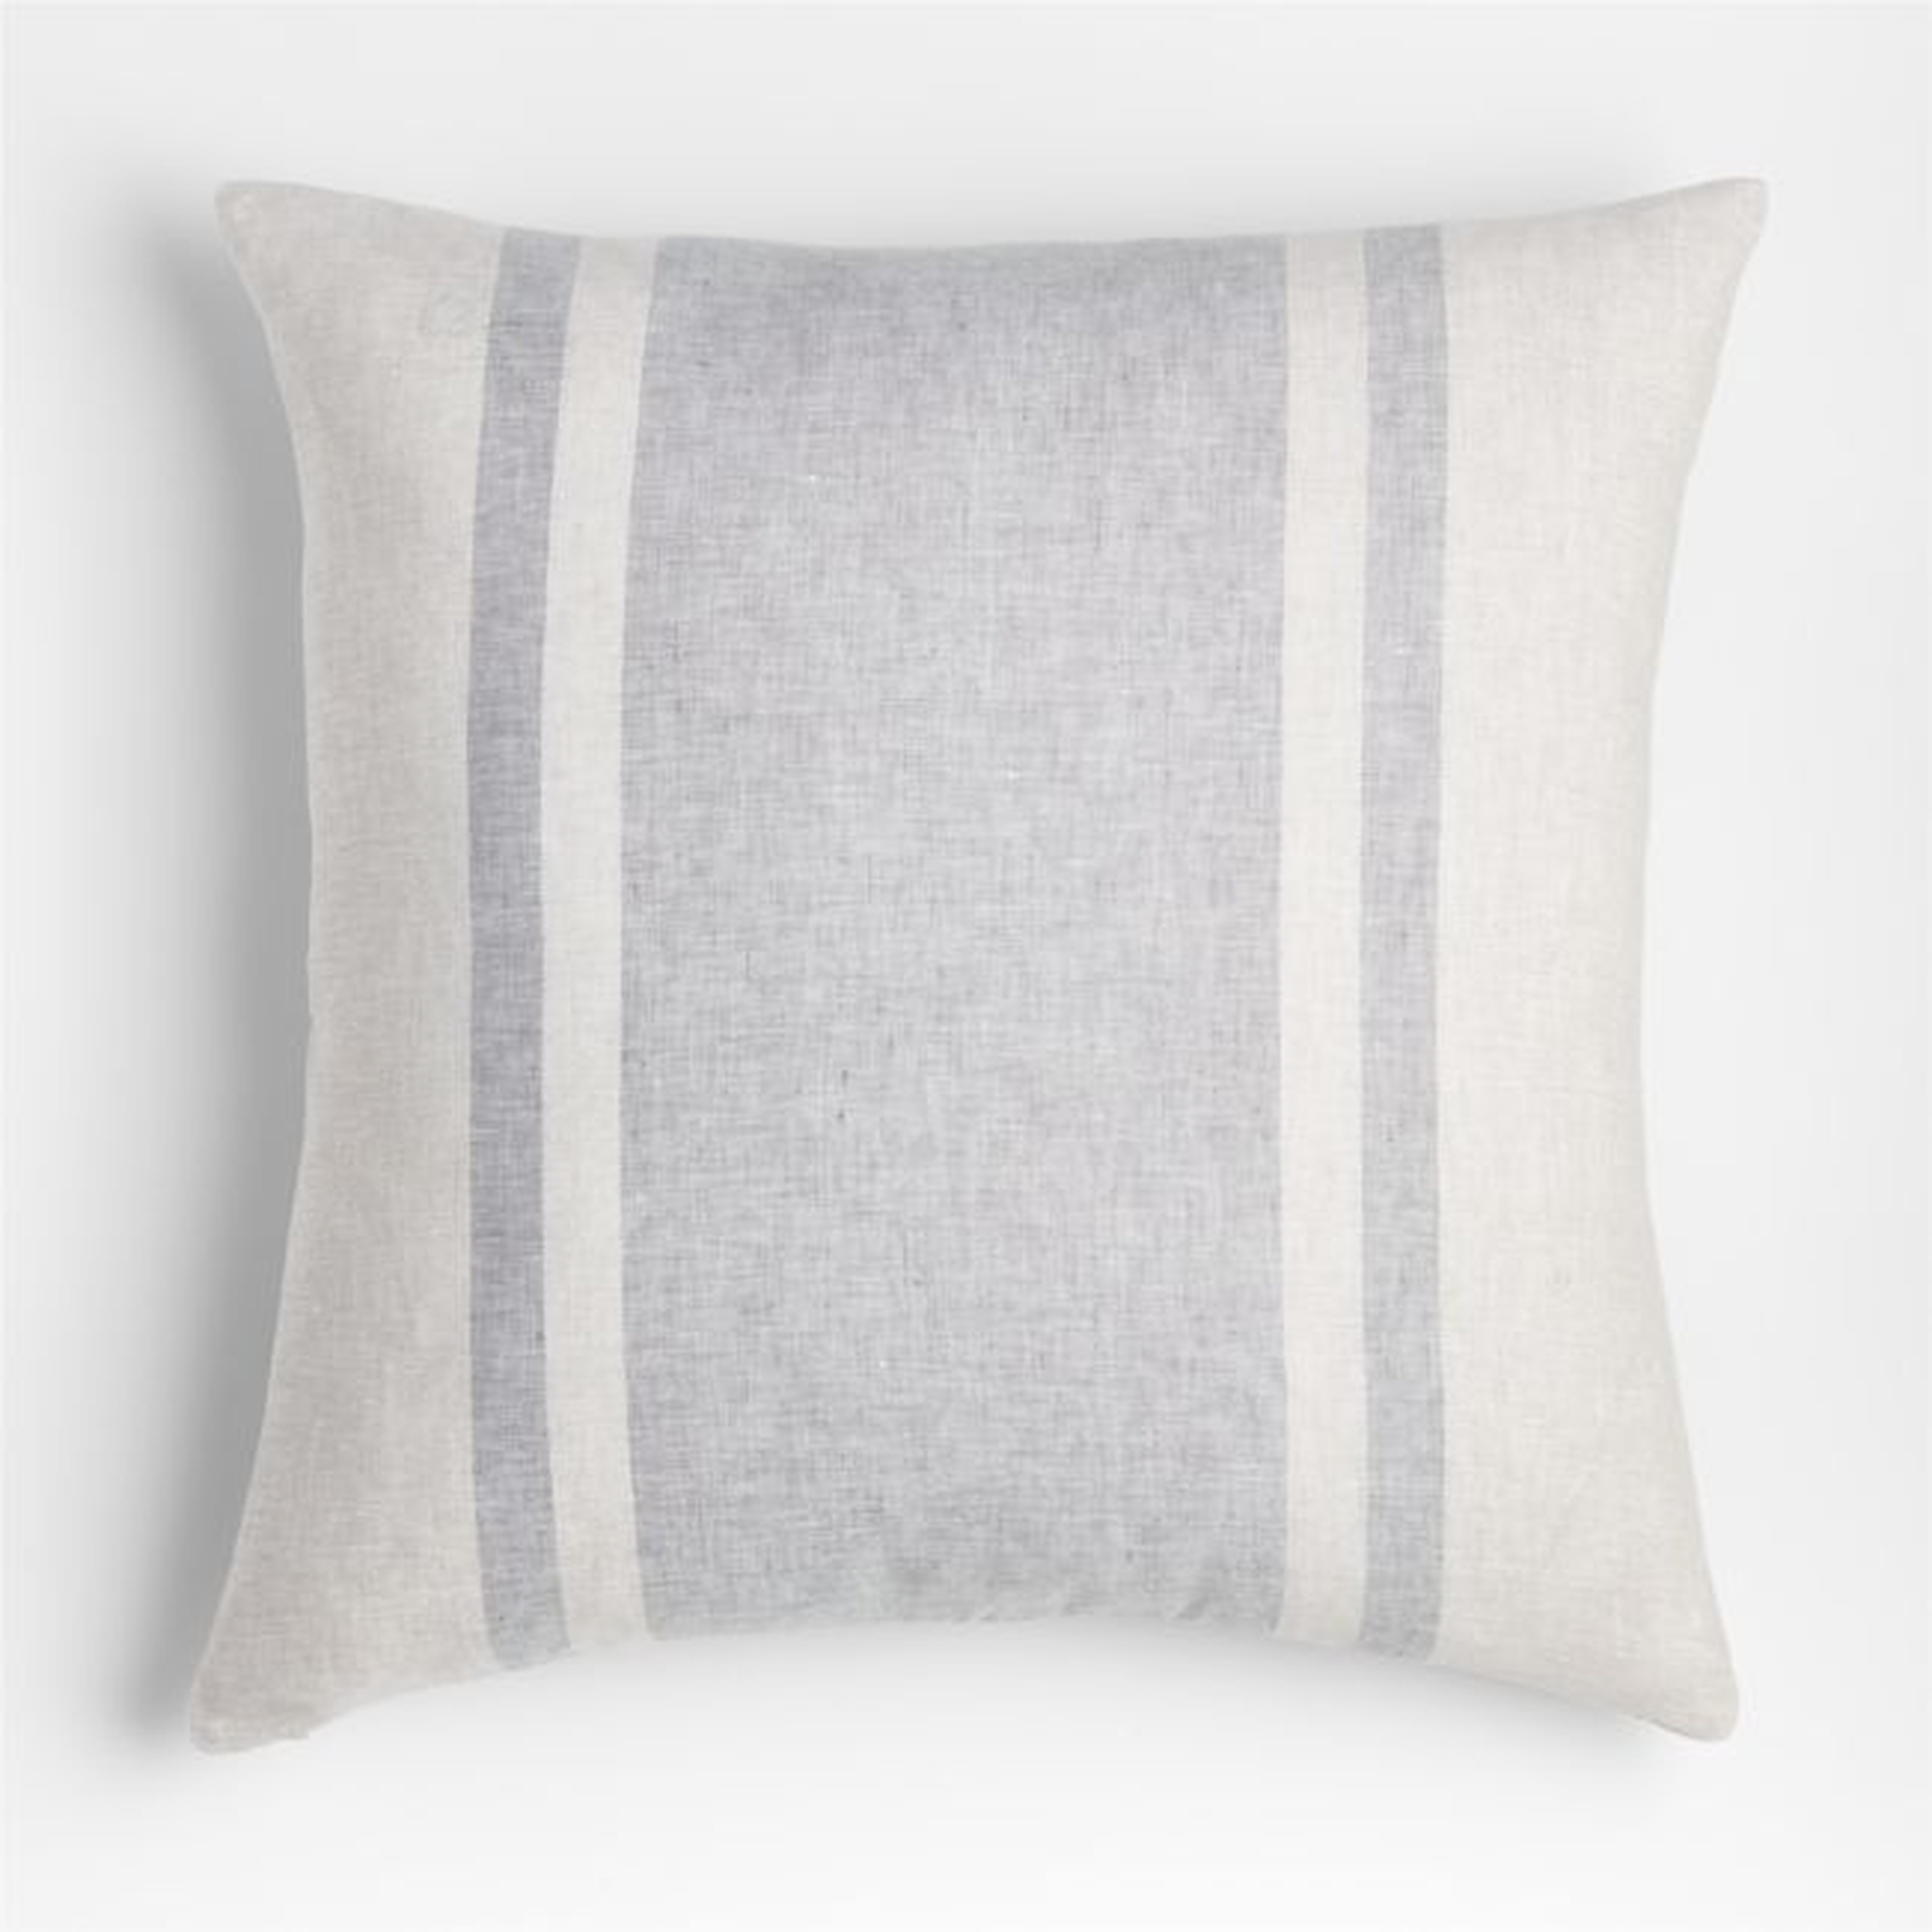 Jackie 23"x23" Grey Linen Throw Pillow with Down-Alternative Insert by Leanne Ford - Crate and Barrel